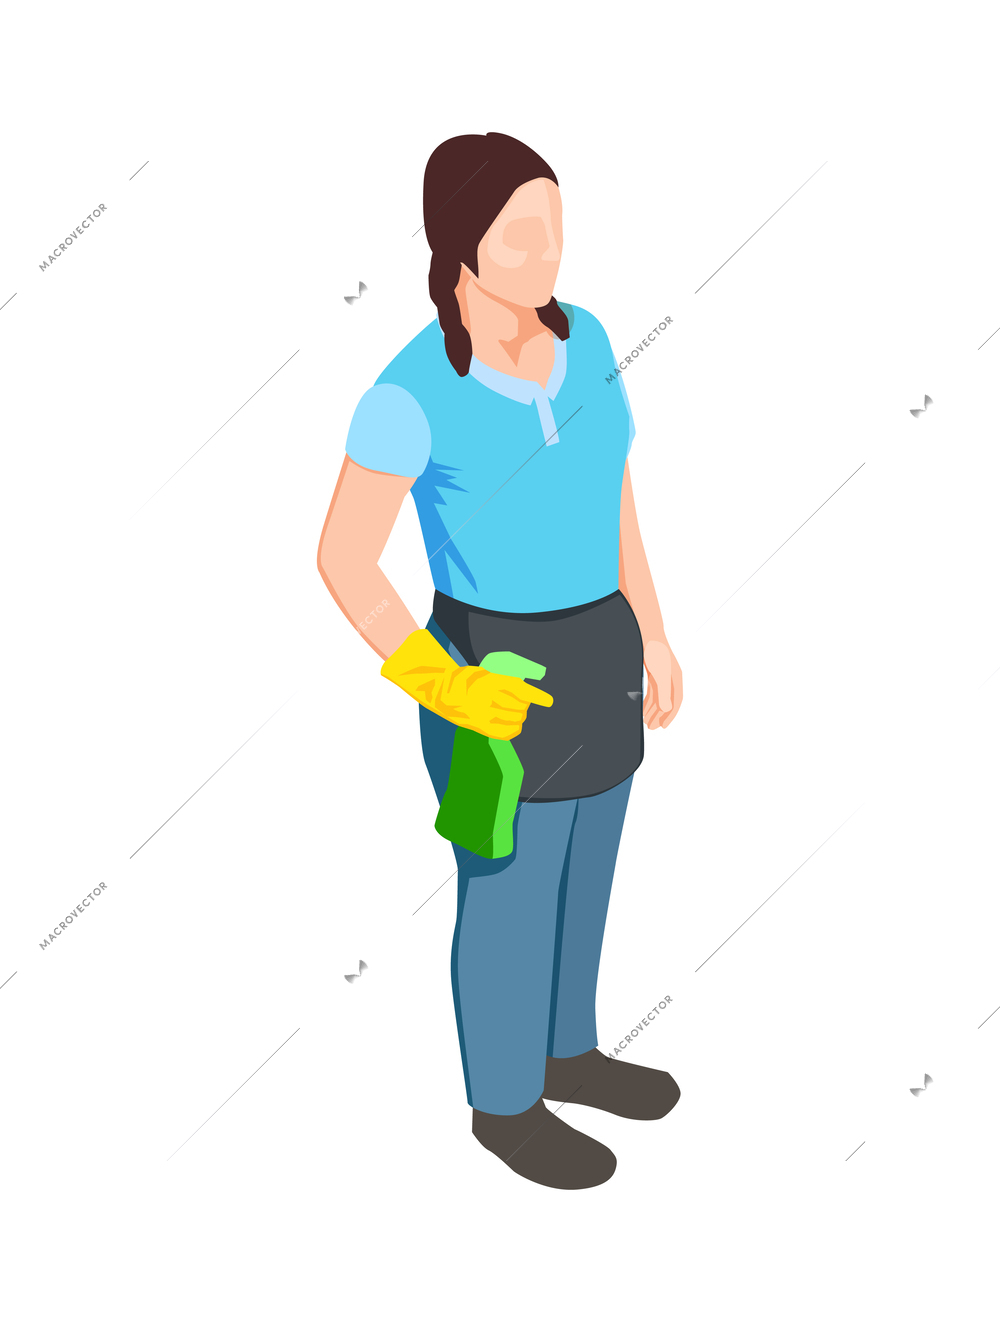 Female cleaning service worker with spray bottle isometric character vector illustration